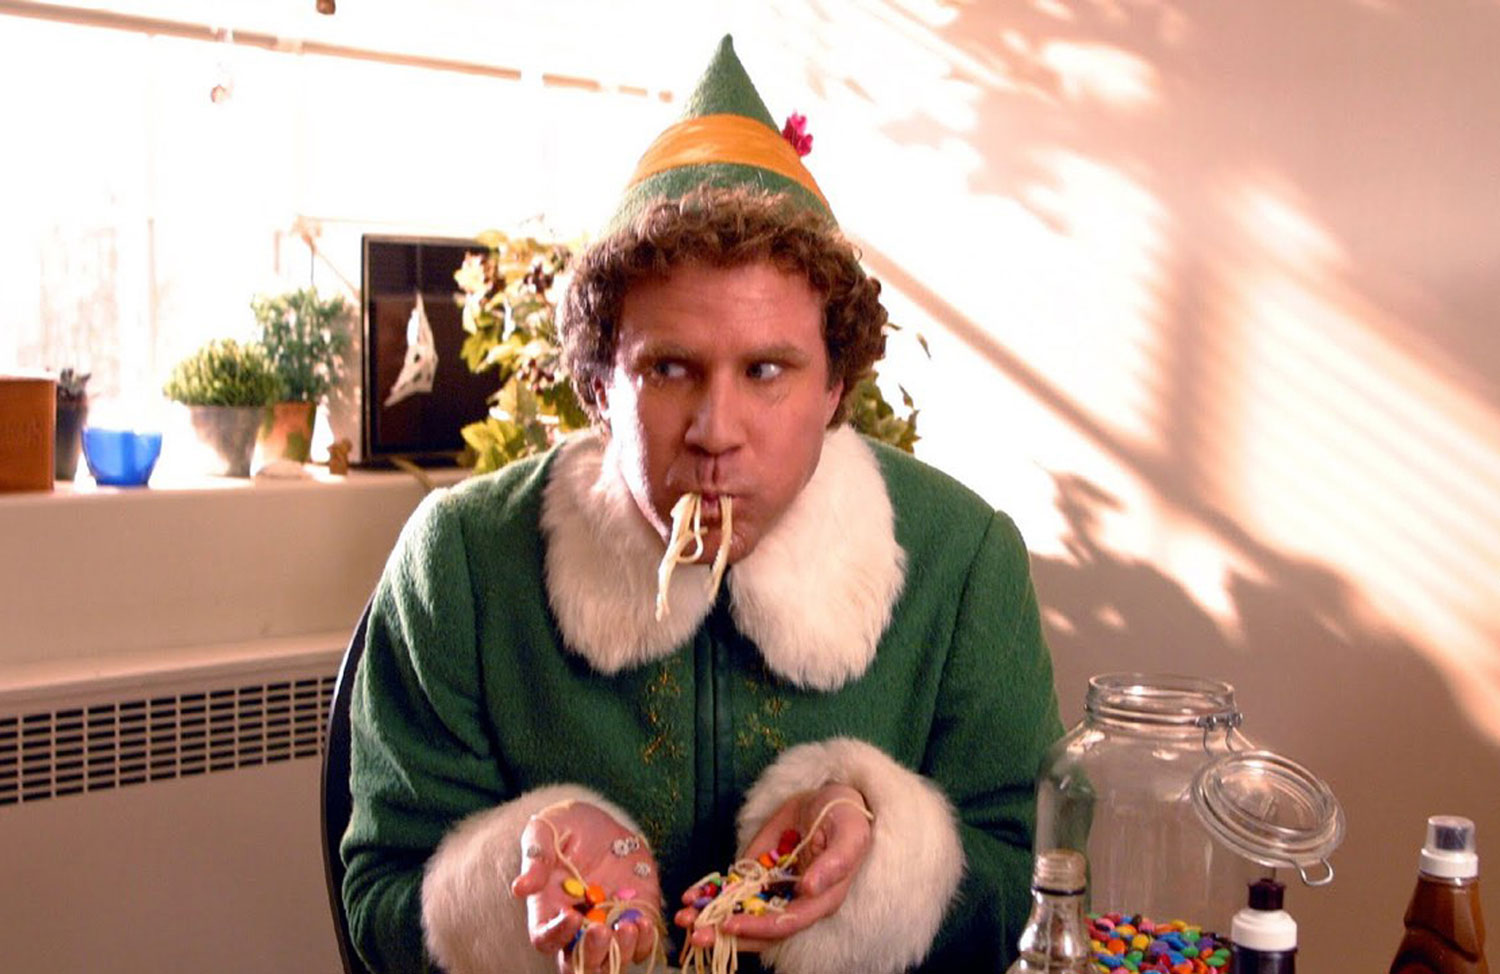 Sometimes it’s about quality and not money. Will Ferrell turned down $29 million dollars to make Elf 2, but he didn’t want to deal with the criticism if it turned out bad. And let’s face it – Elf was adorable. Let’s just be left with that image.